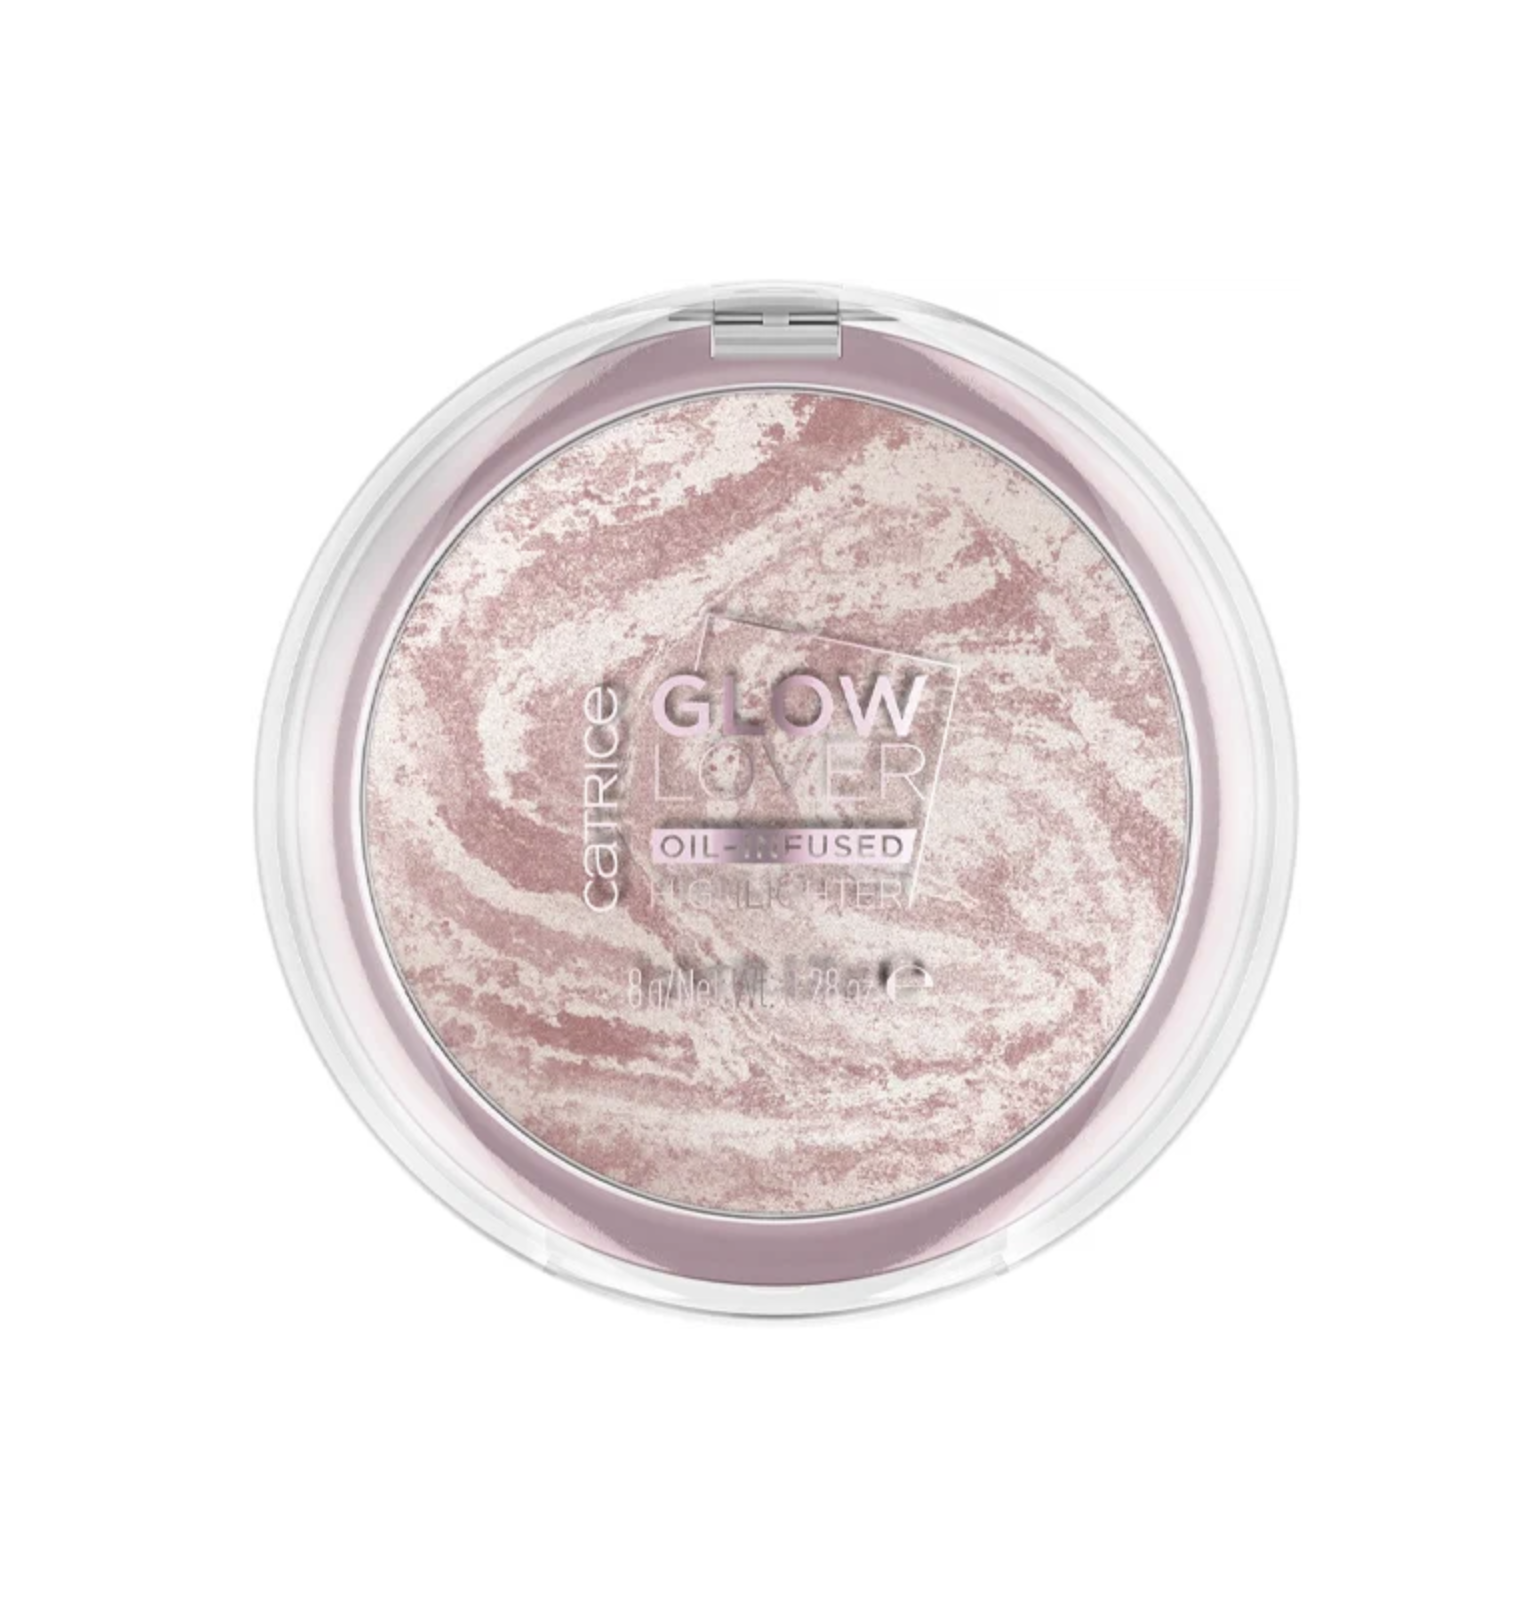   / Catrice - -   Glow Lover Oil-Infused  010 Glowing Peony 8 